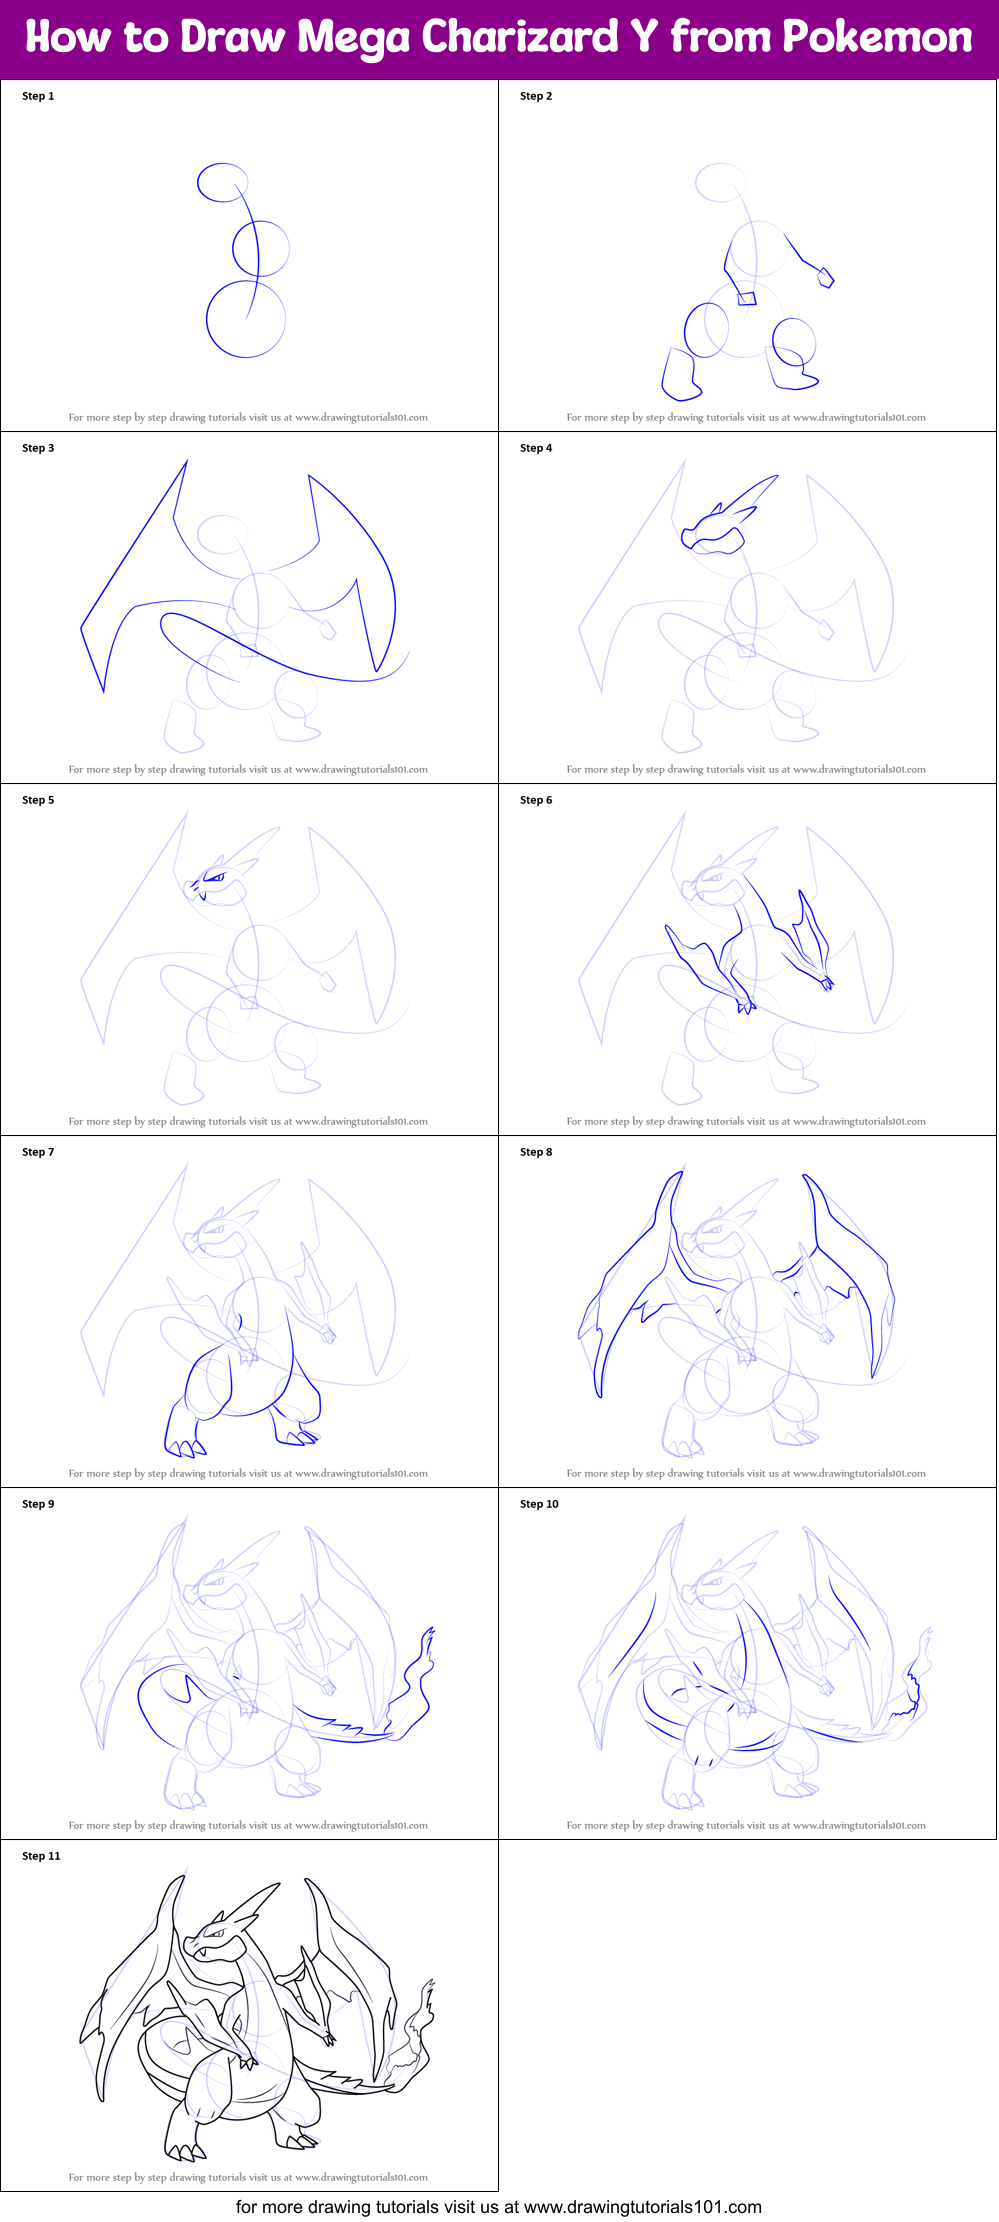 How to Draw Mega Charizard Y from Pokemon printable step by step